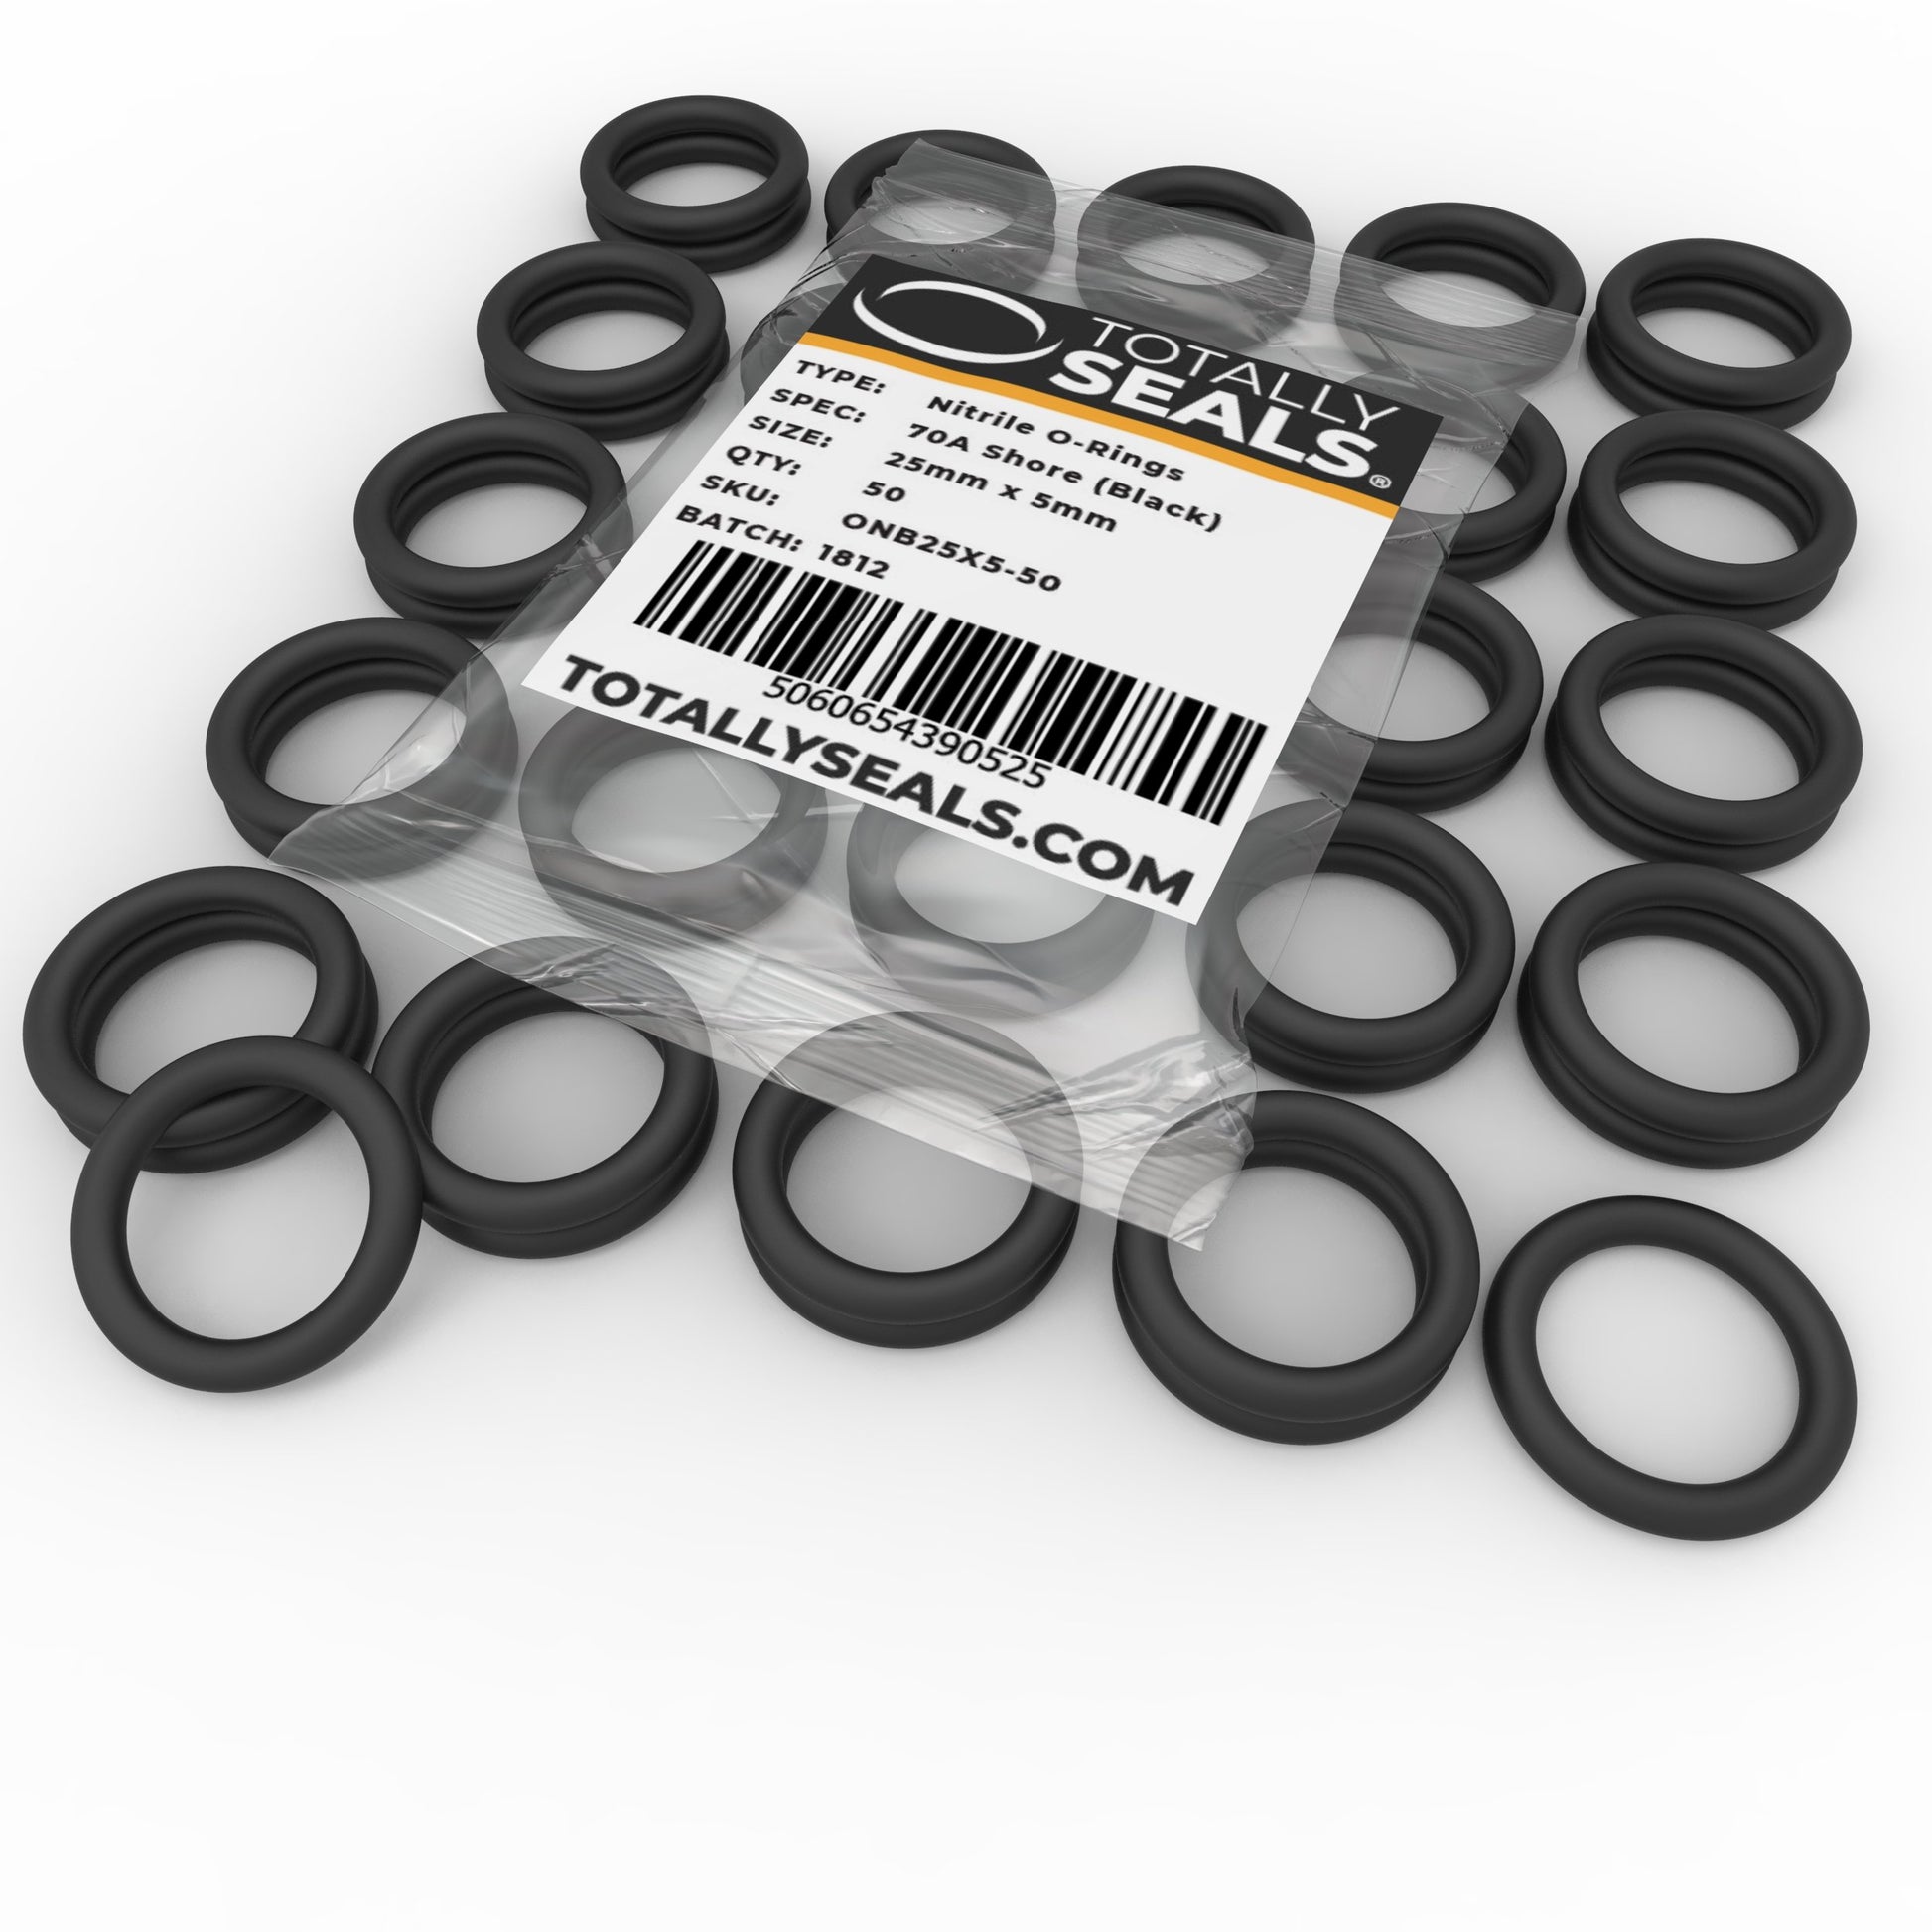 25mm x 5mm (35mm OD) Nitrile O-Rings - Totally Seals®